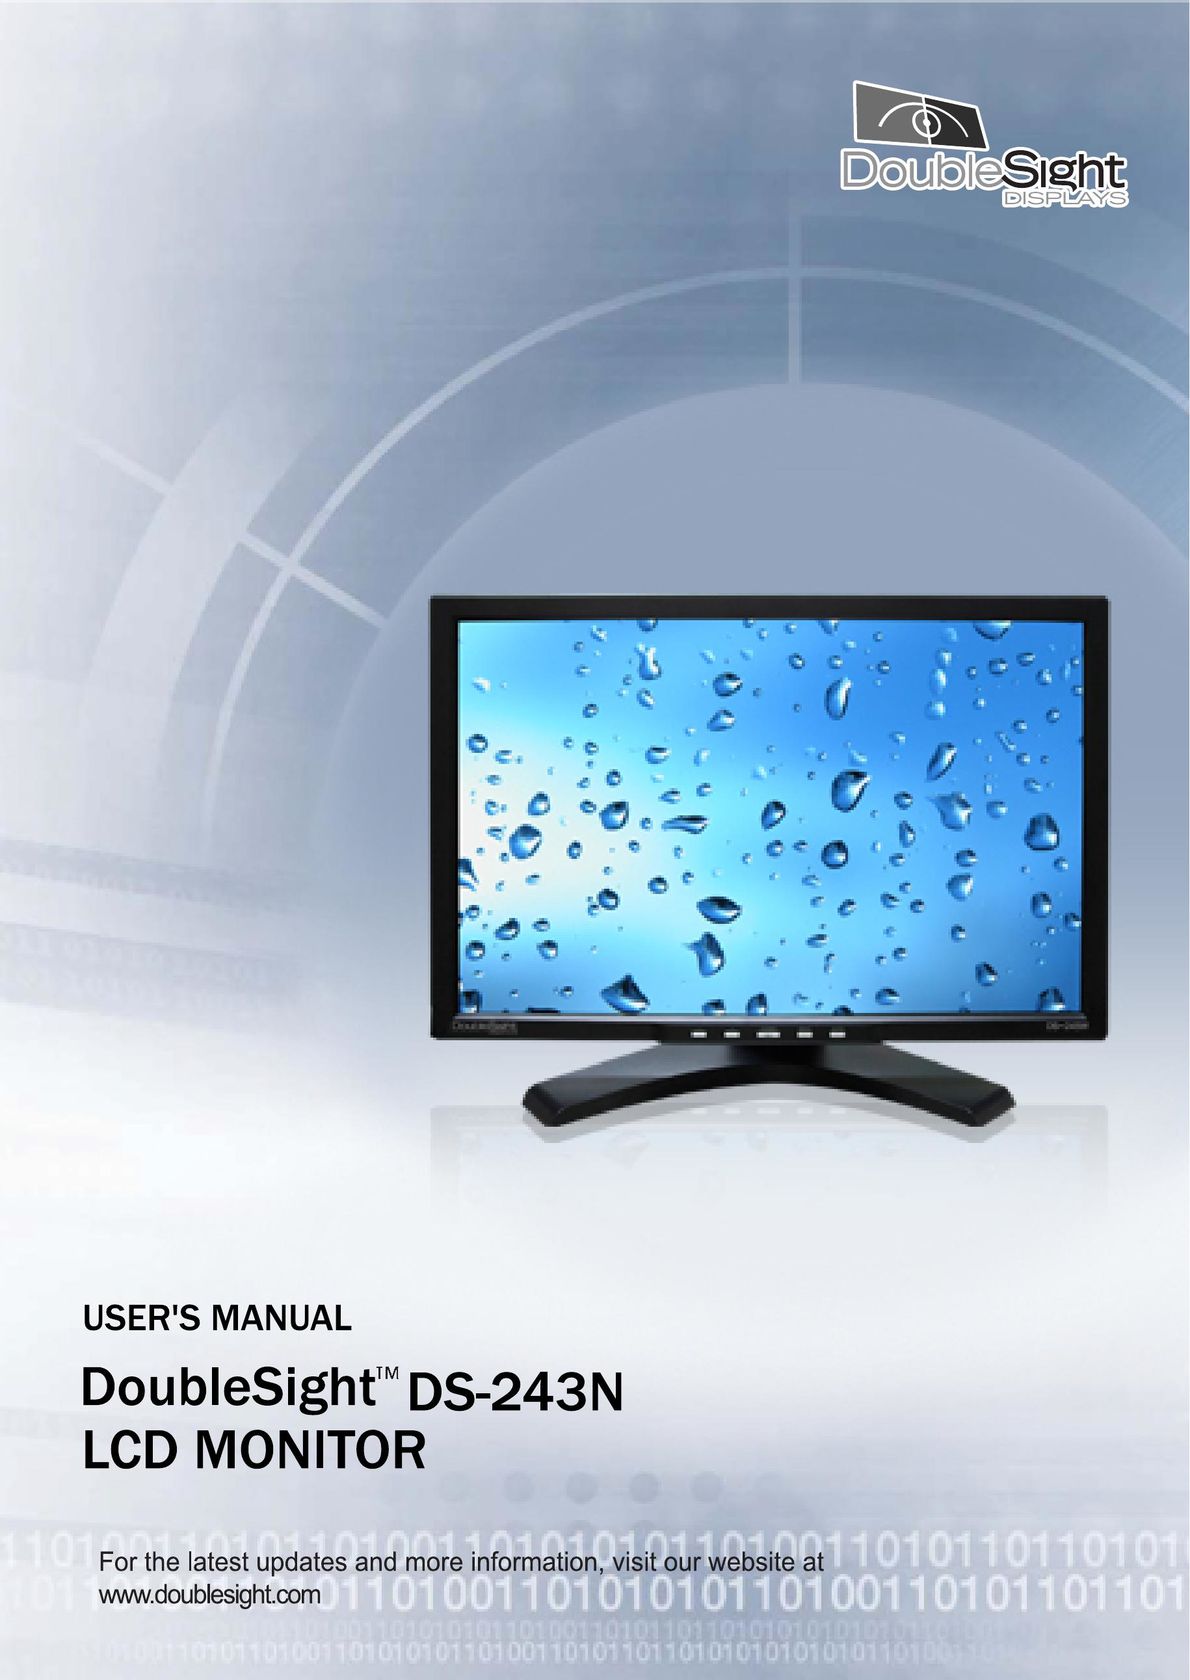 DoubleSight Displays DS-243N Computer Monitor User Manual